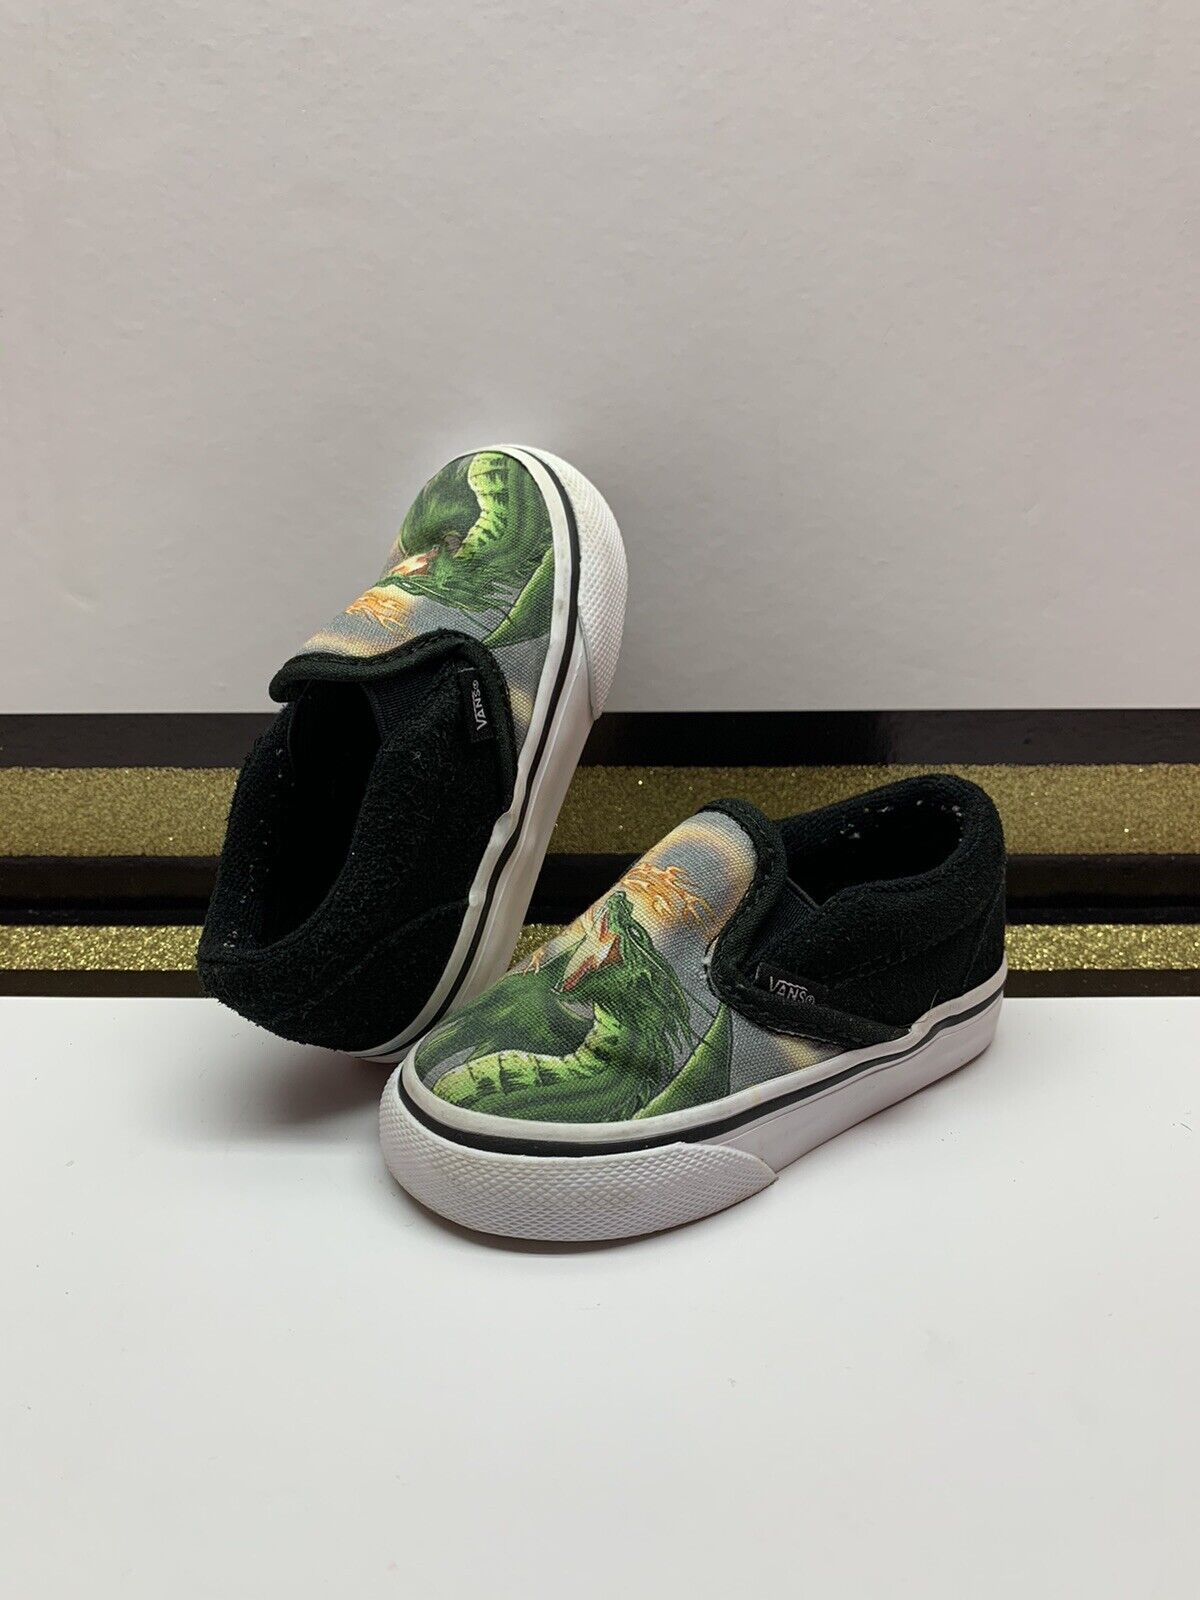 Vans Classic Dragon slip on In Black & Green Toddler Size 5 shoes